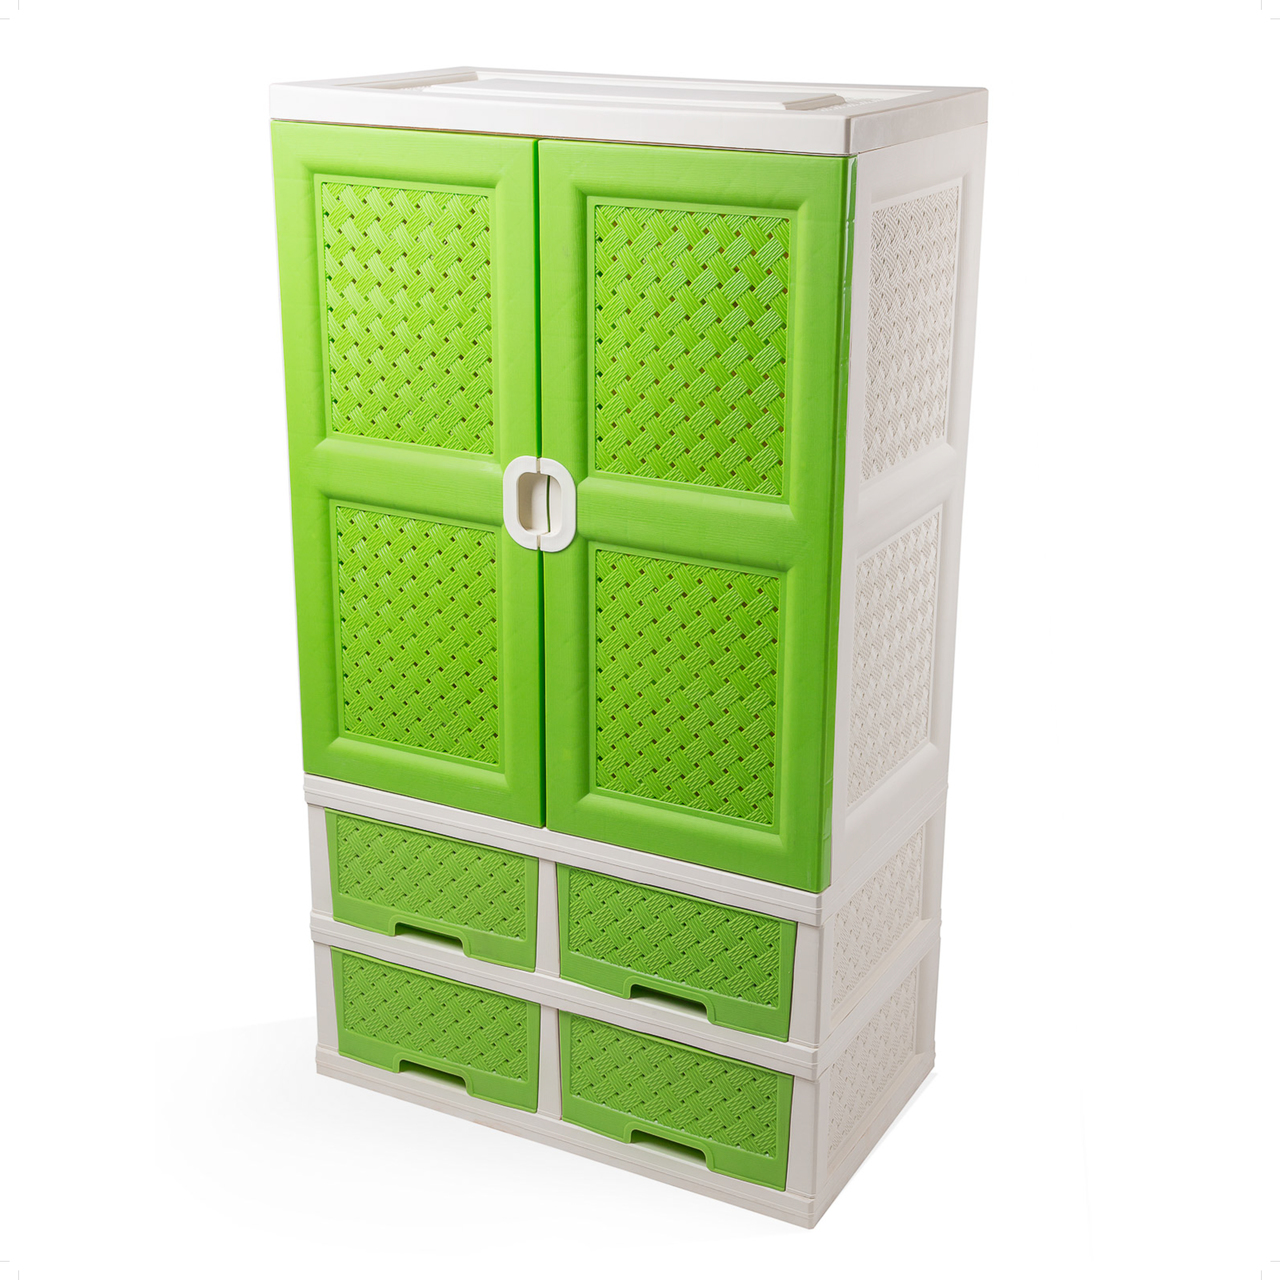 Classic wardrobe with four Drawers